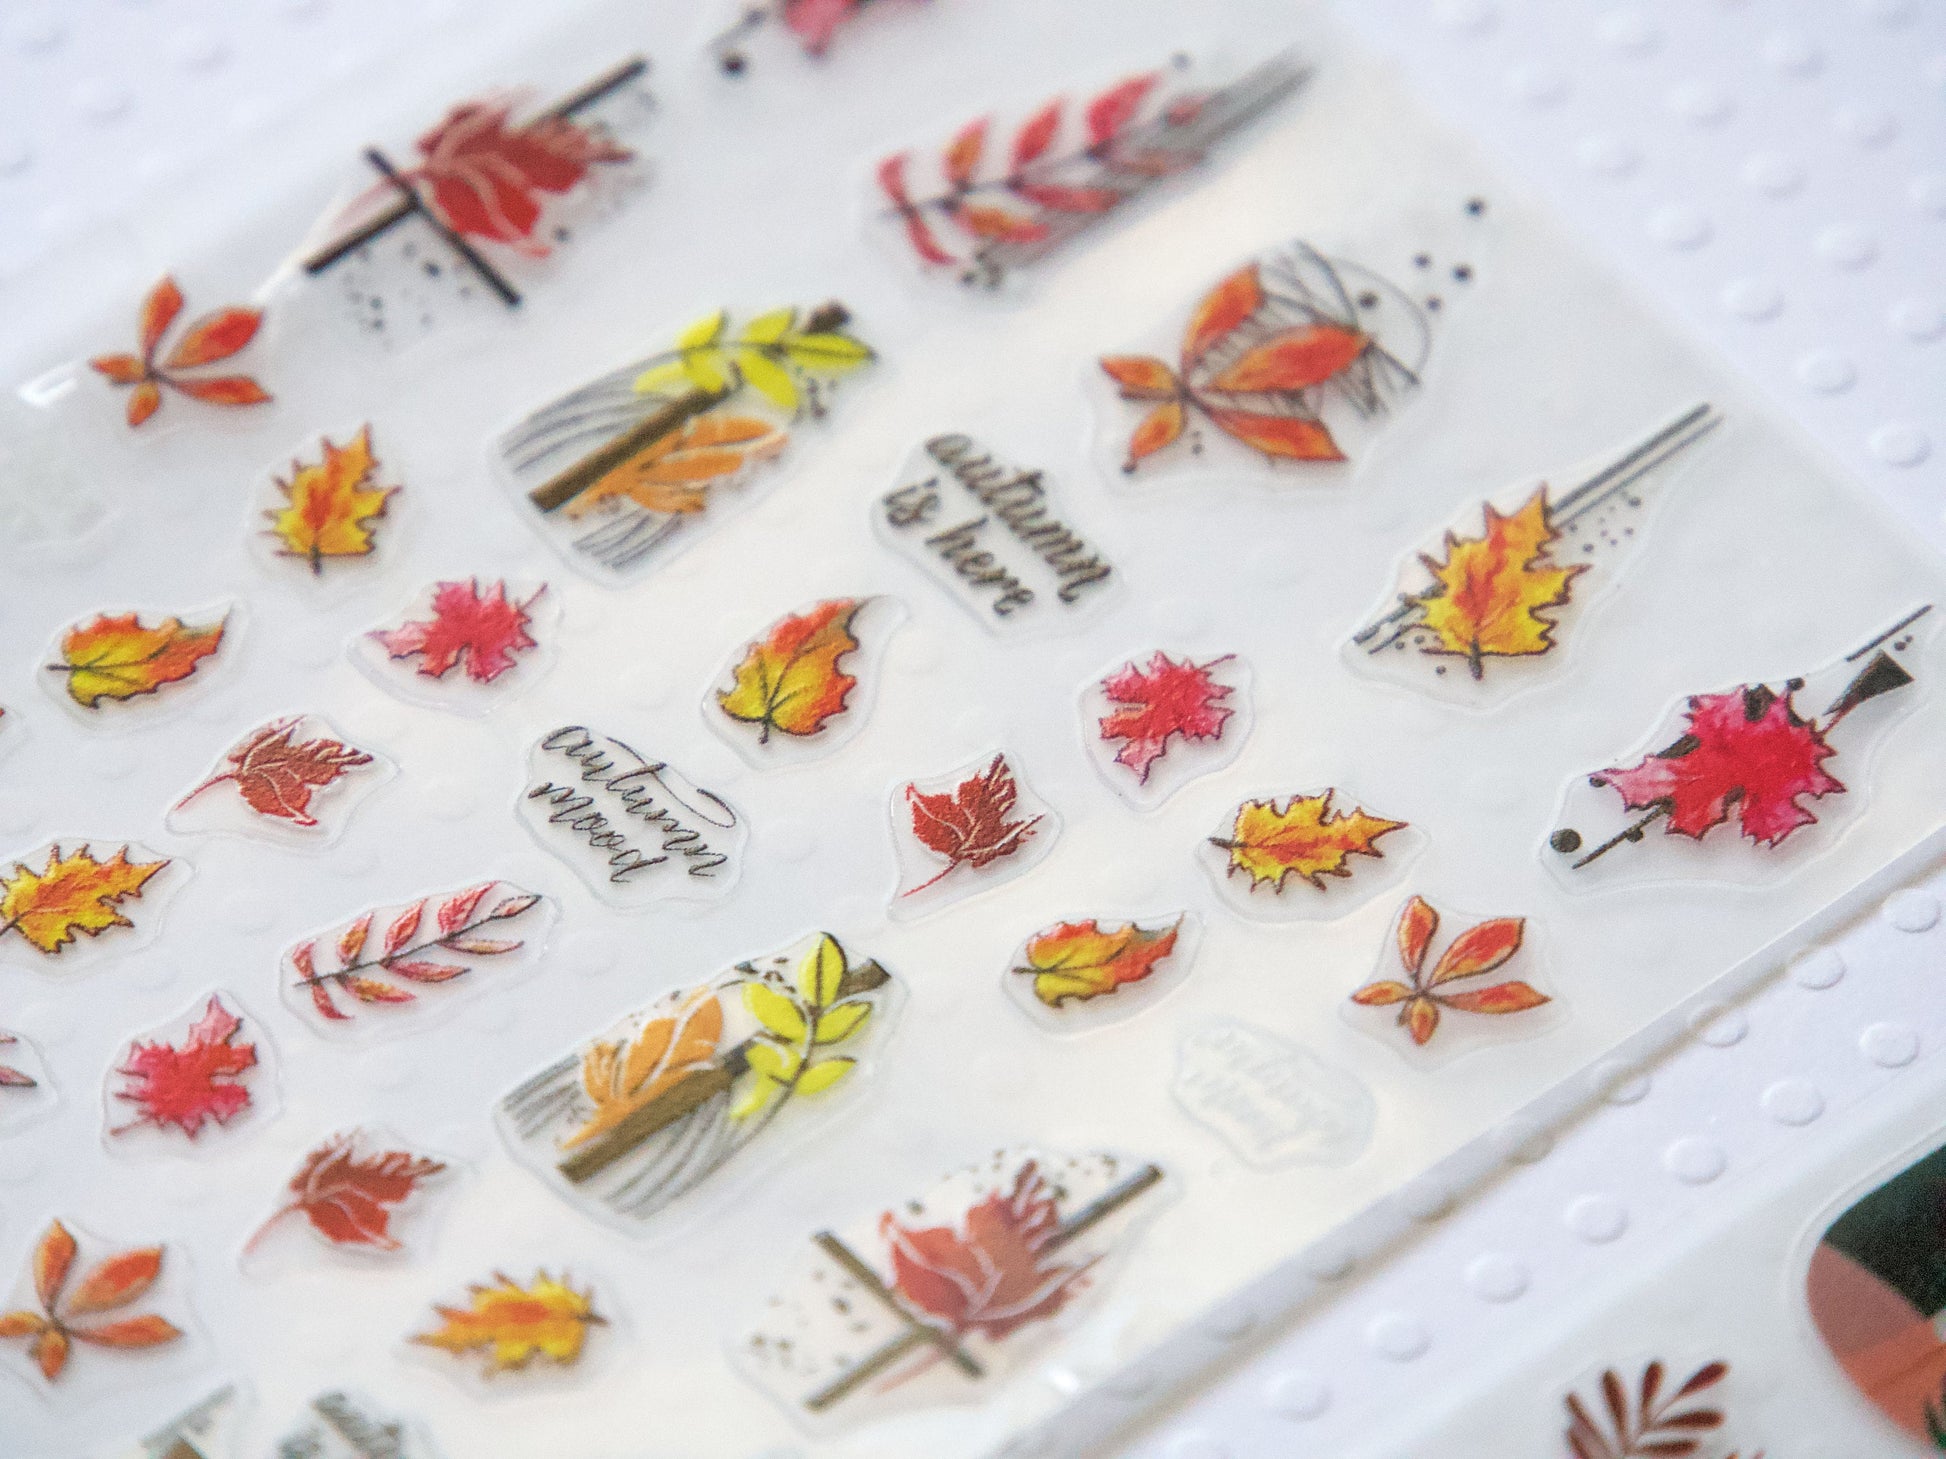 Winter Fall Maple Leaf Nail Sticker/ Red-Yellow Radiance Falling Leaves Nature's Palette Nails Decal/ Autumn Bliss Manicure